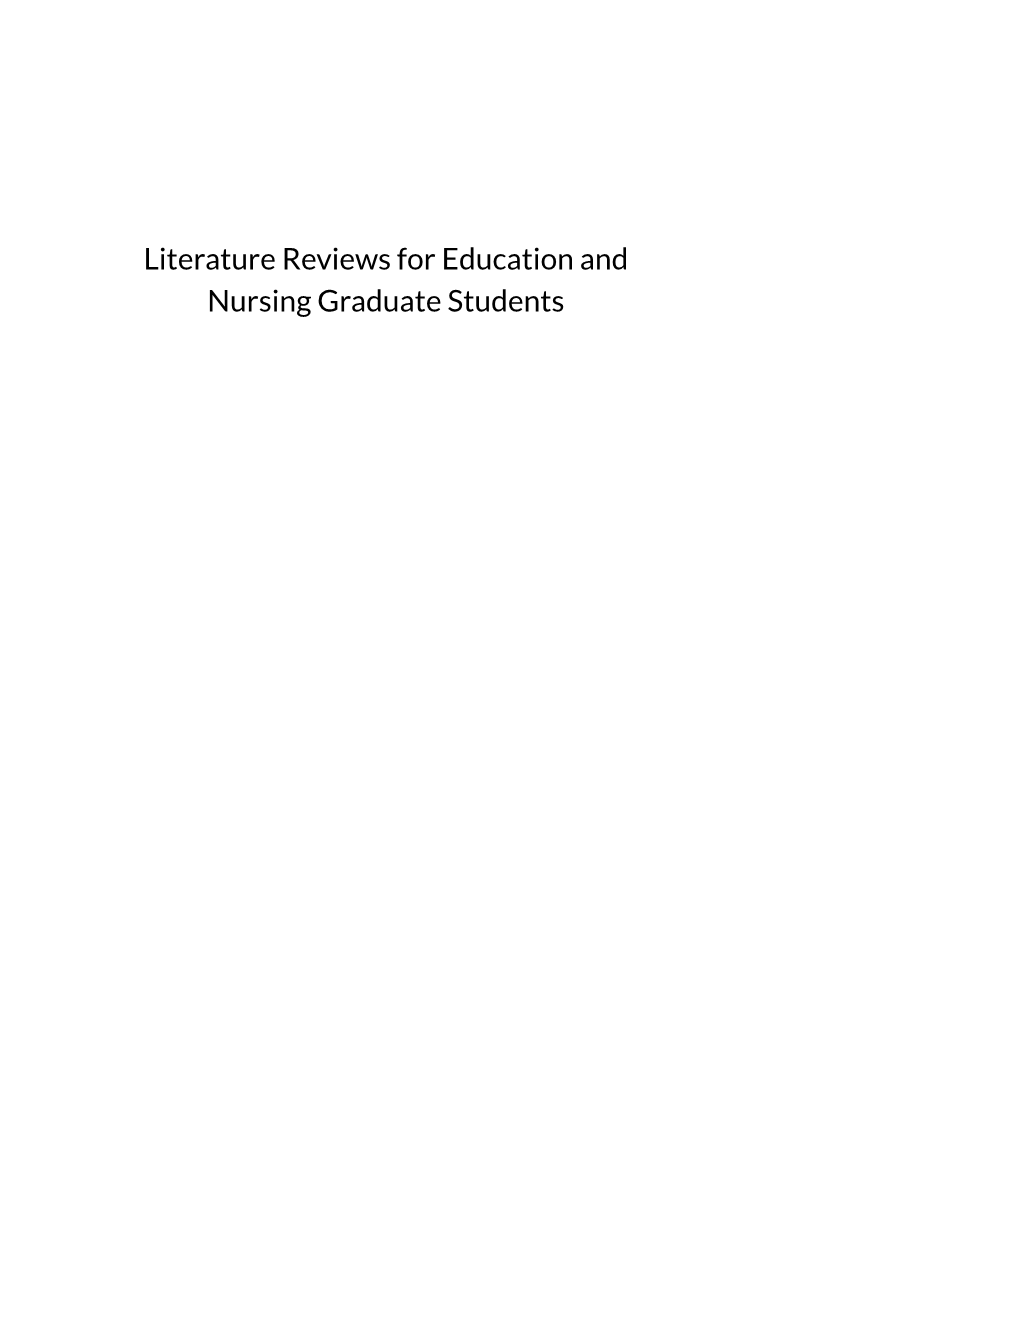 Literature Reviews for Education and Nursing Graduate Students